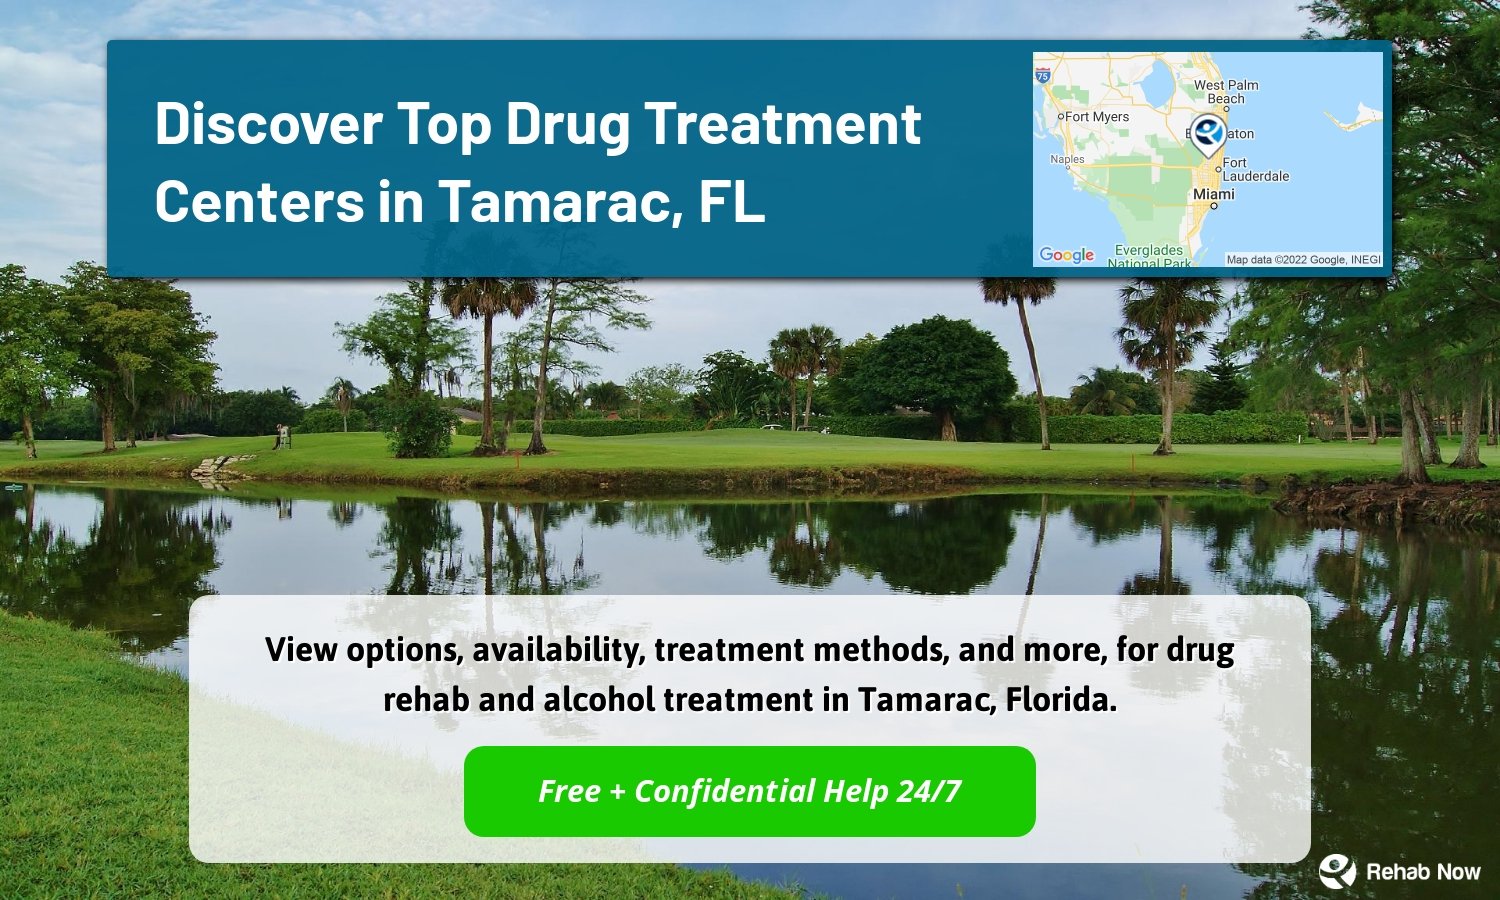 View options, availability, treatment methods, and more, for drug rehab and alcohol treatment in Tamarac, Florida.